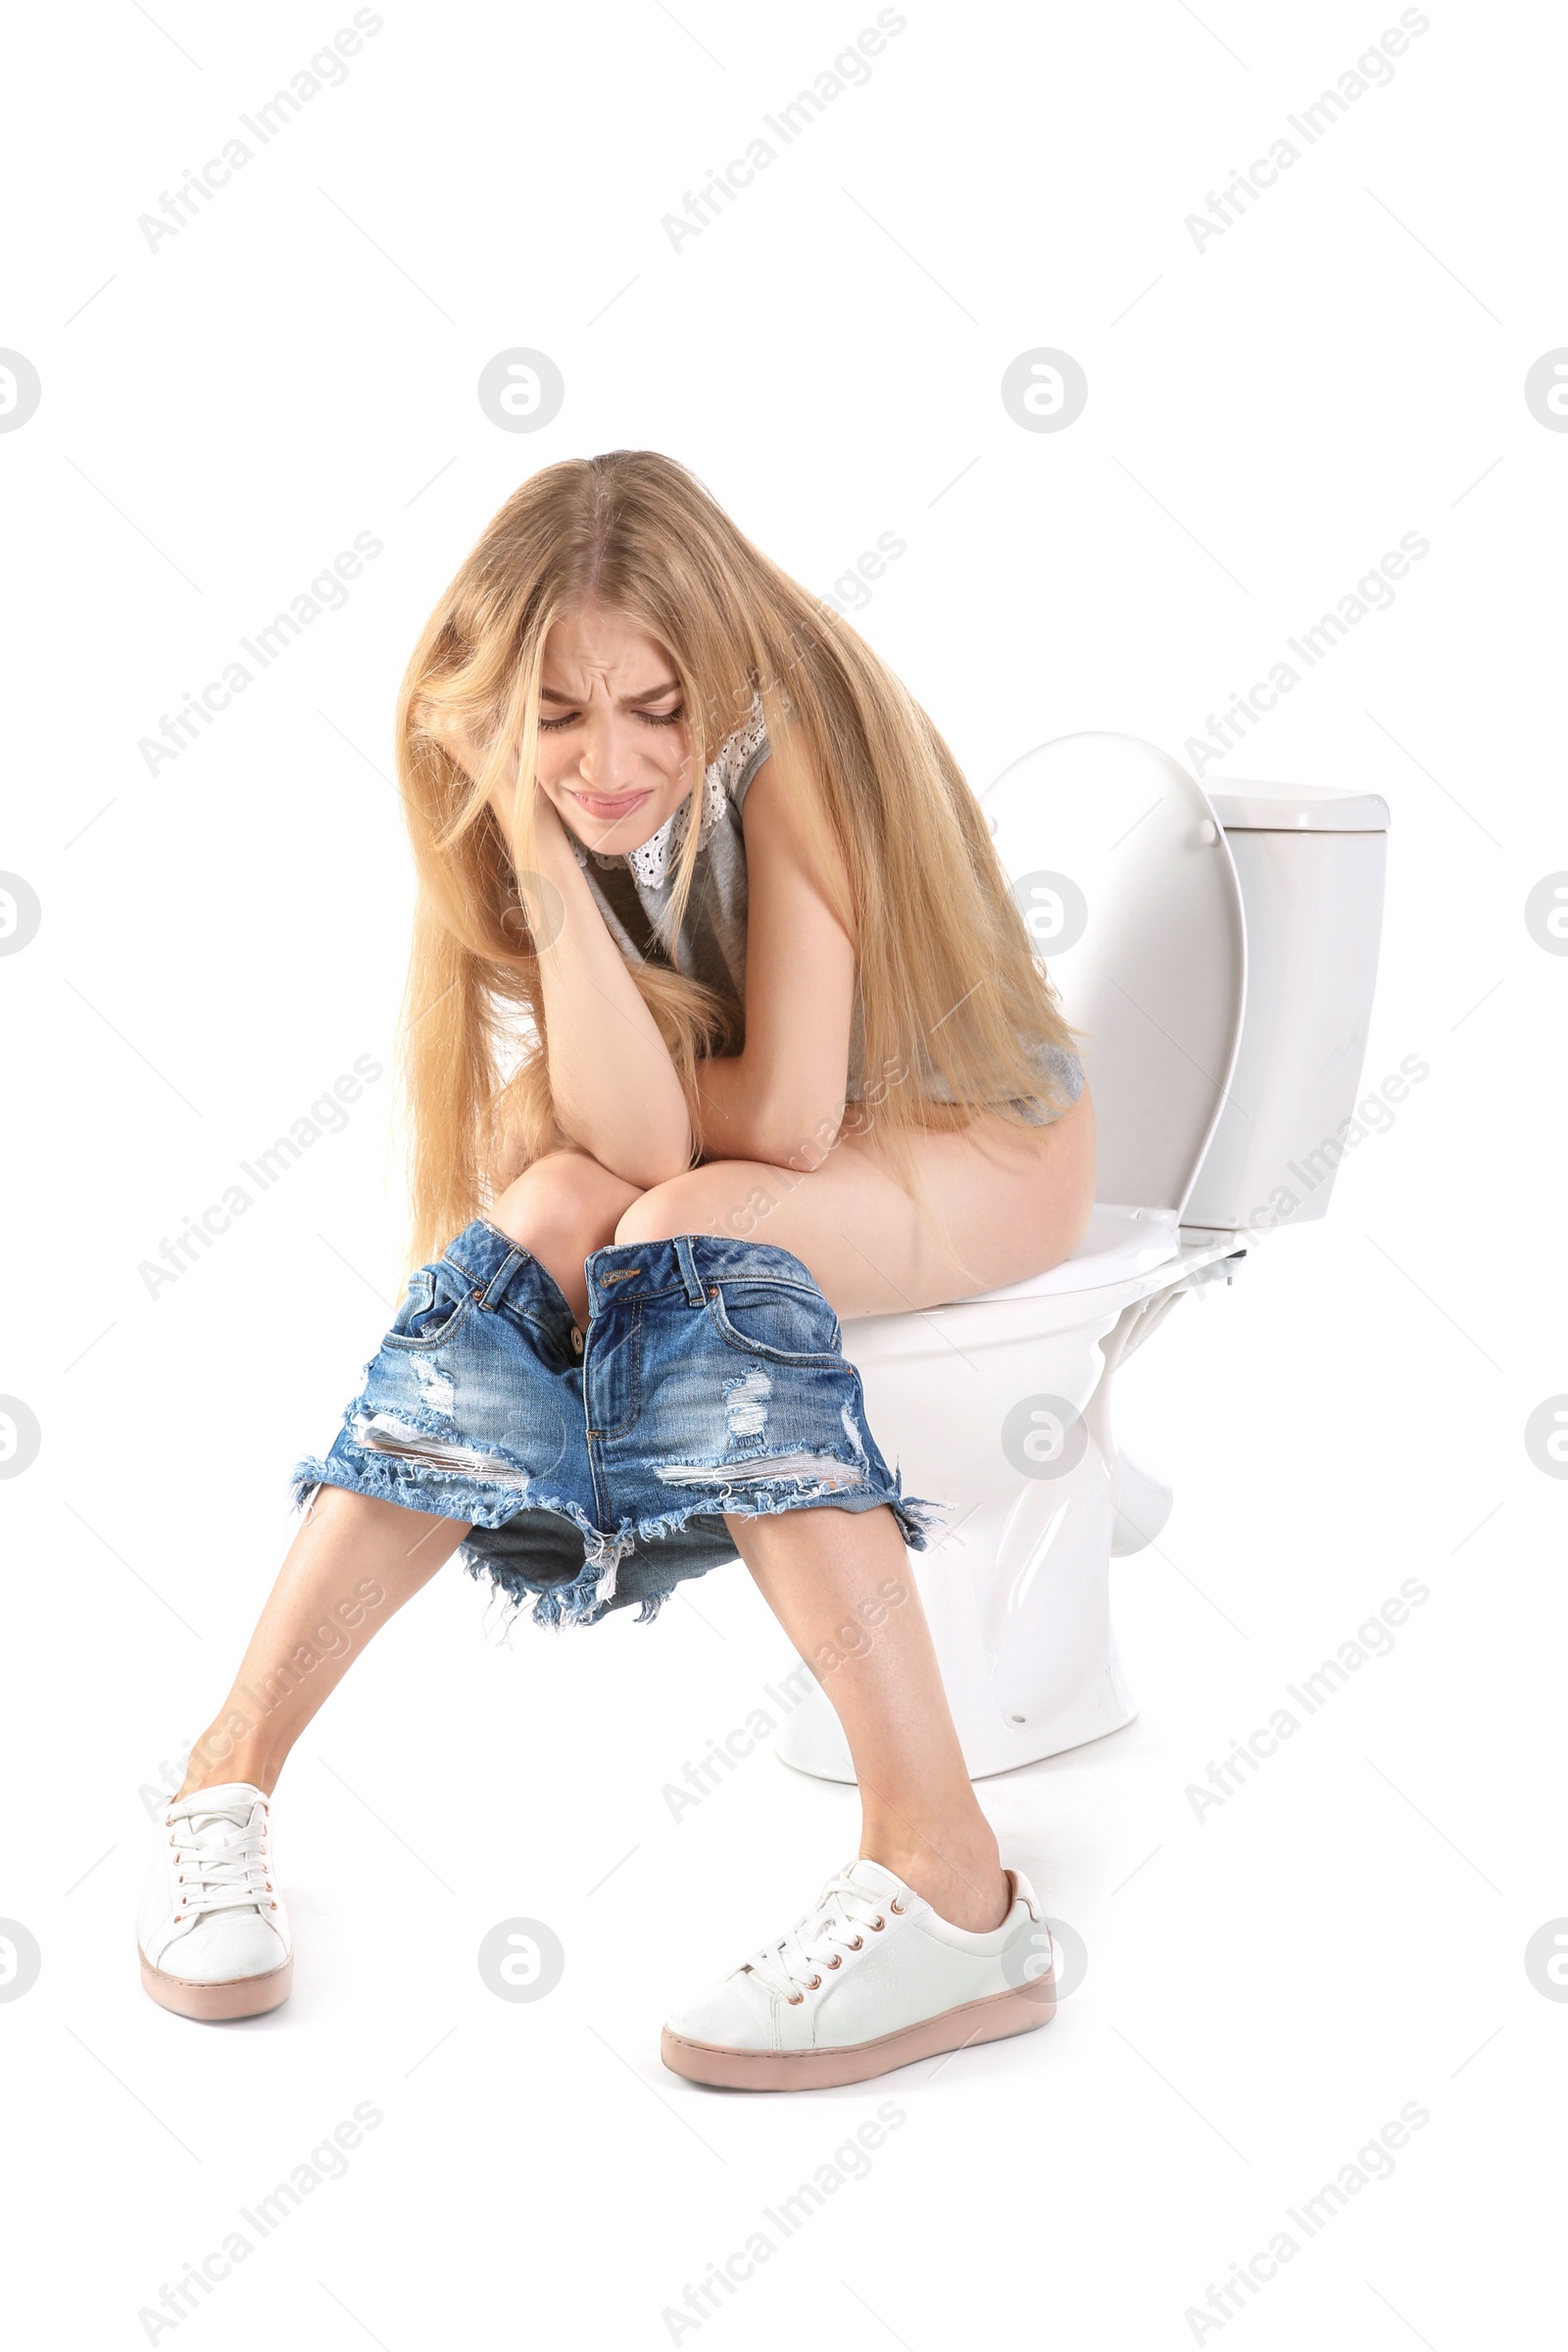 Photo of Young woman suffering from diarrhea on toilet bowl. Isolated on white